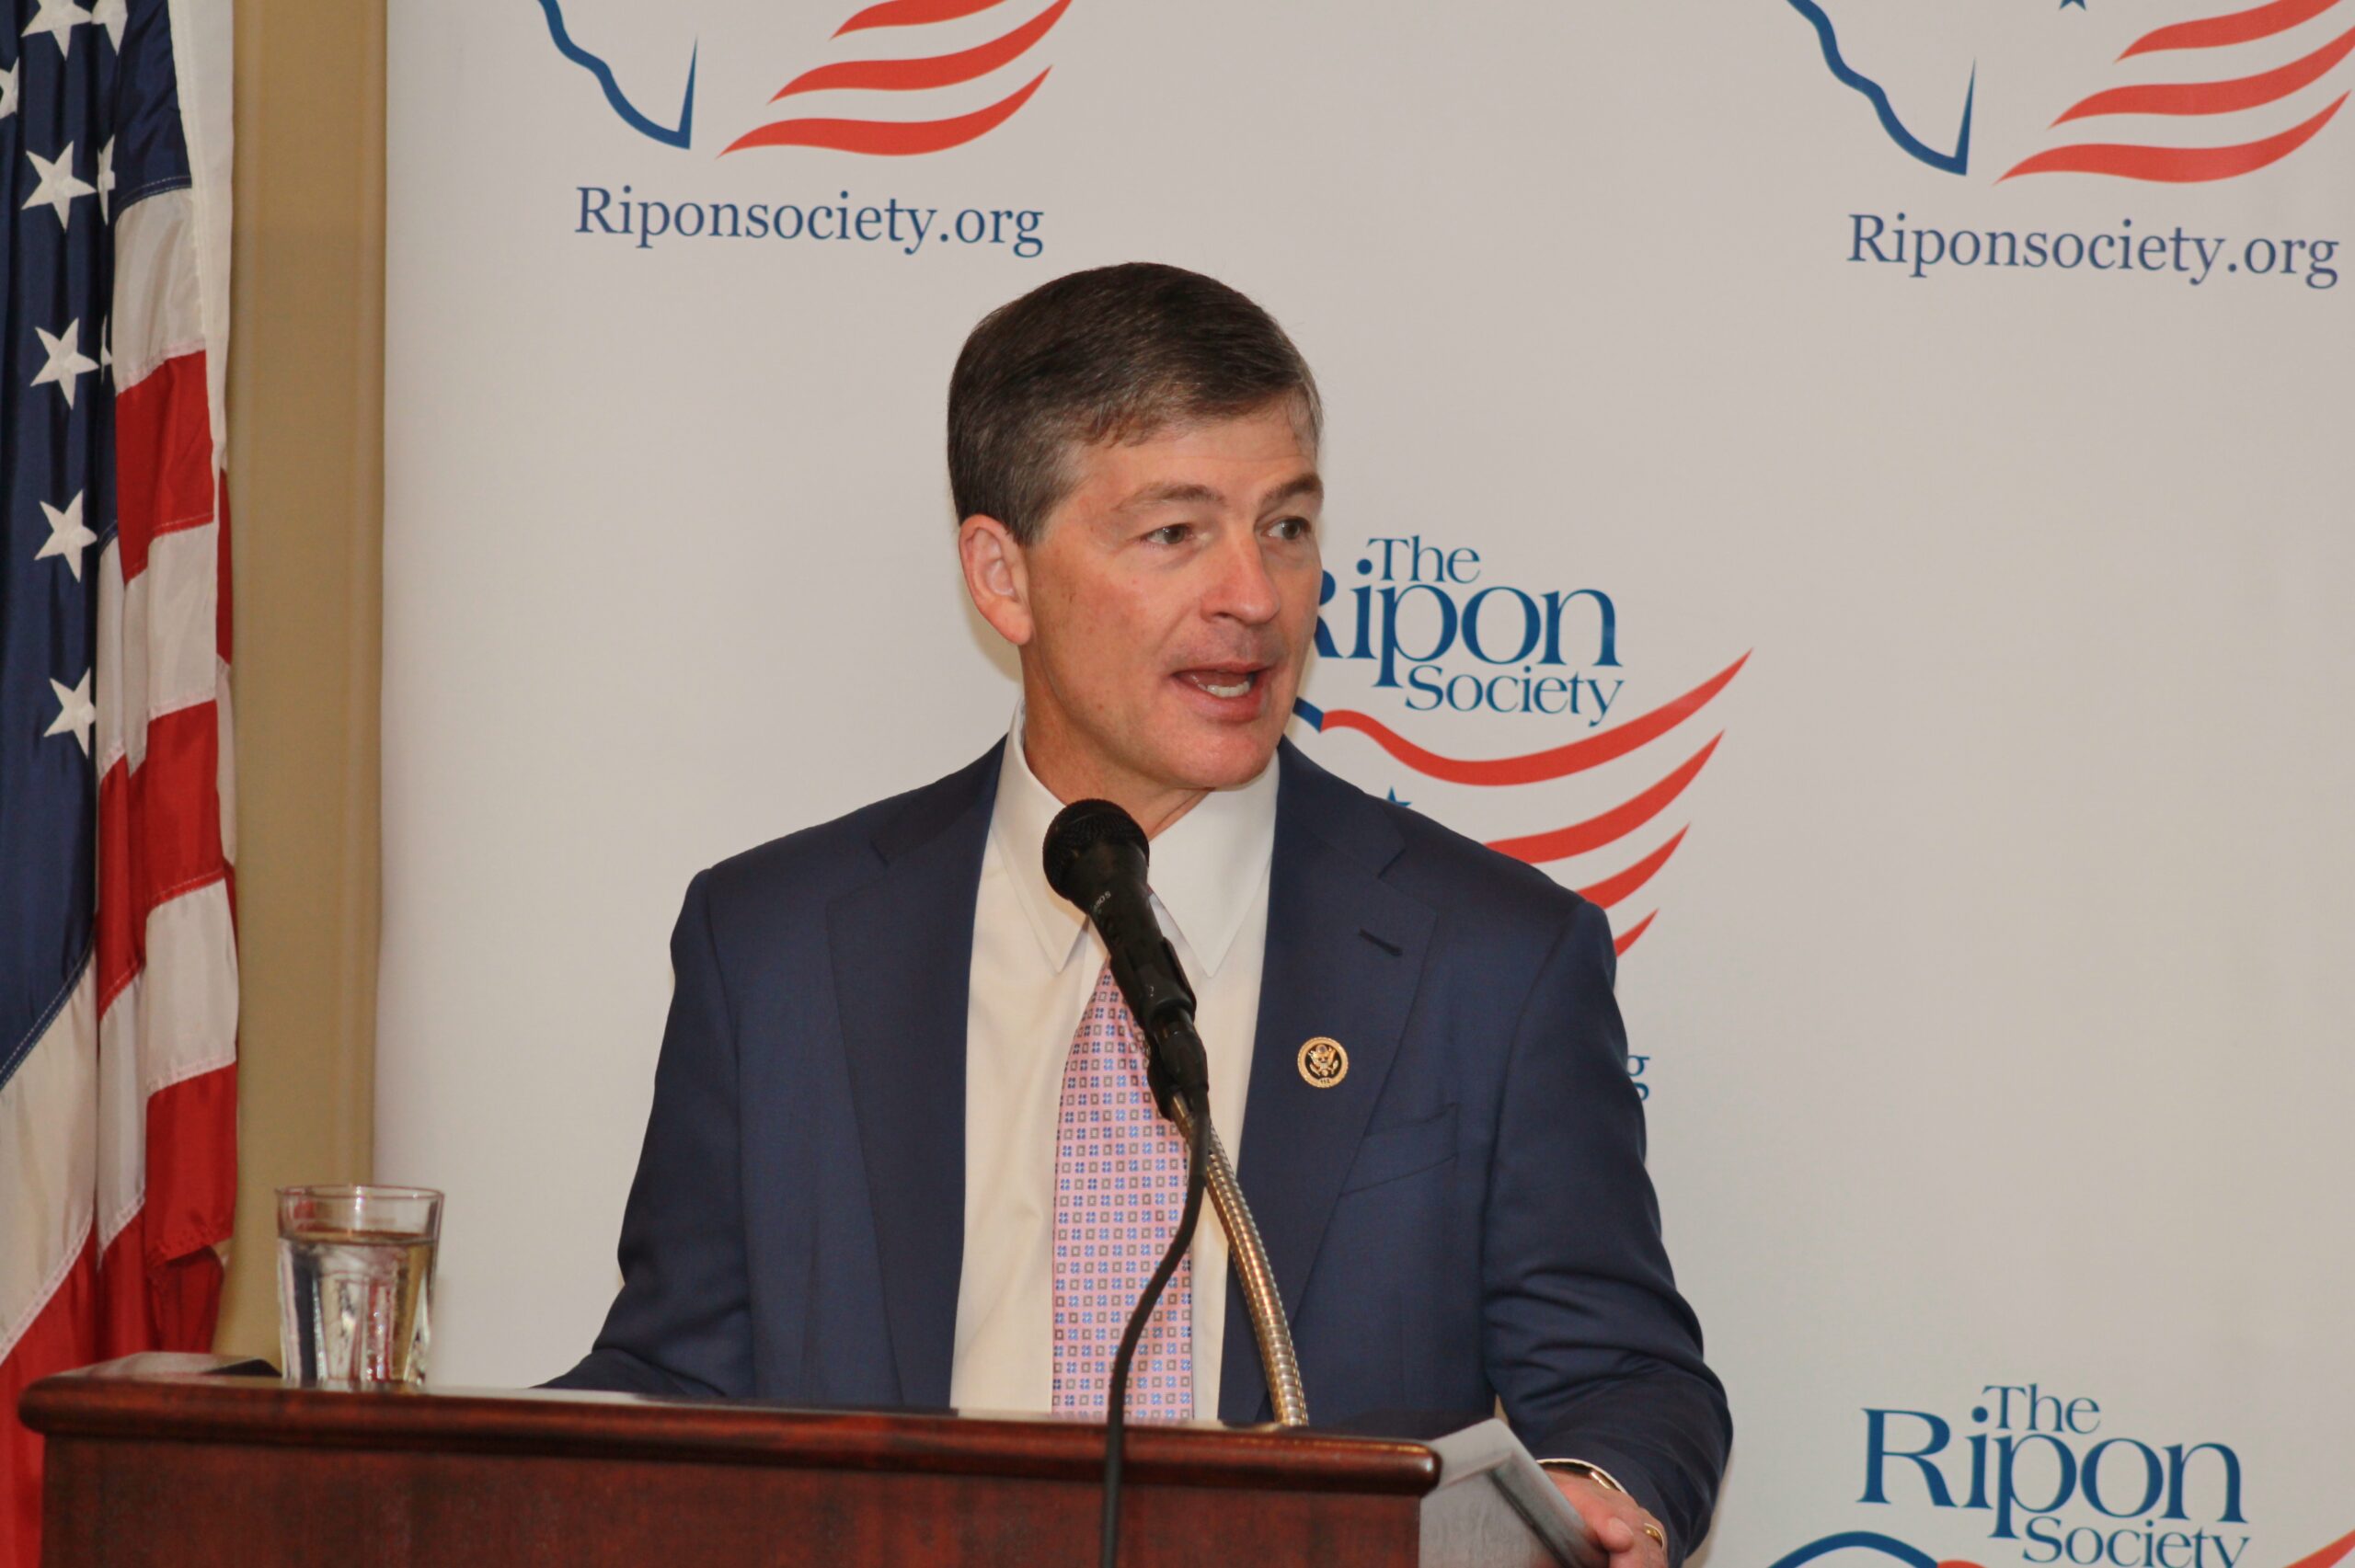 After Racking Up Impressive List of Accomplishments, Hensarling Sets His Sights on His Next Target — Replacing Dodd-Frank